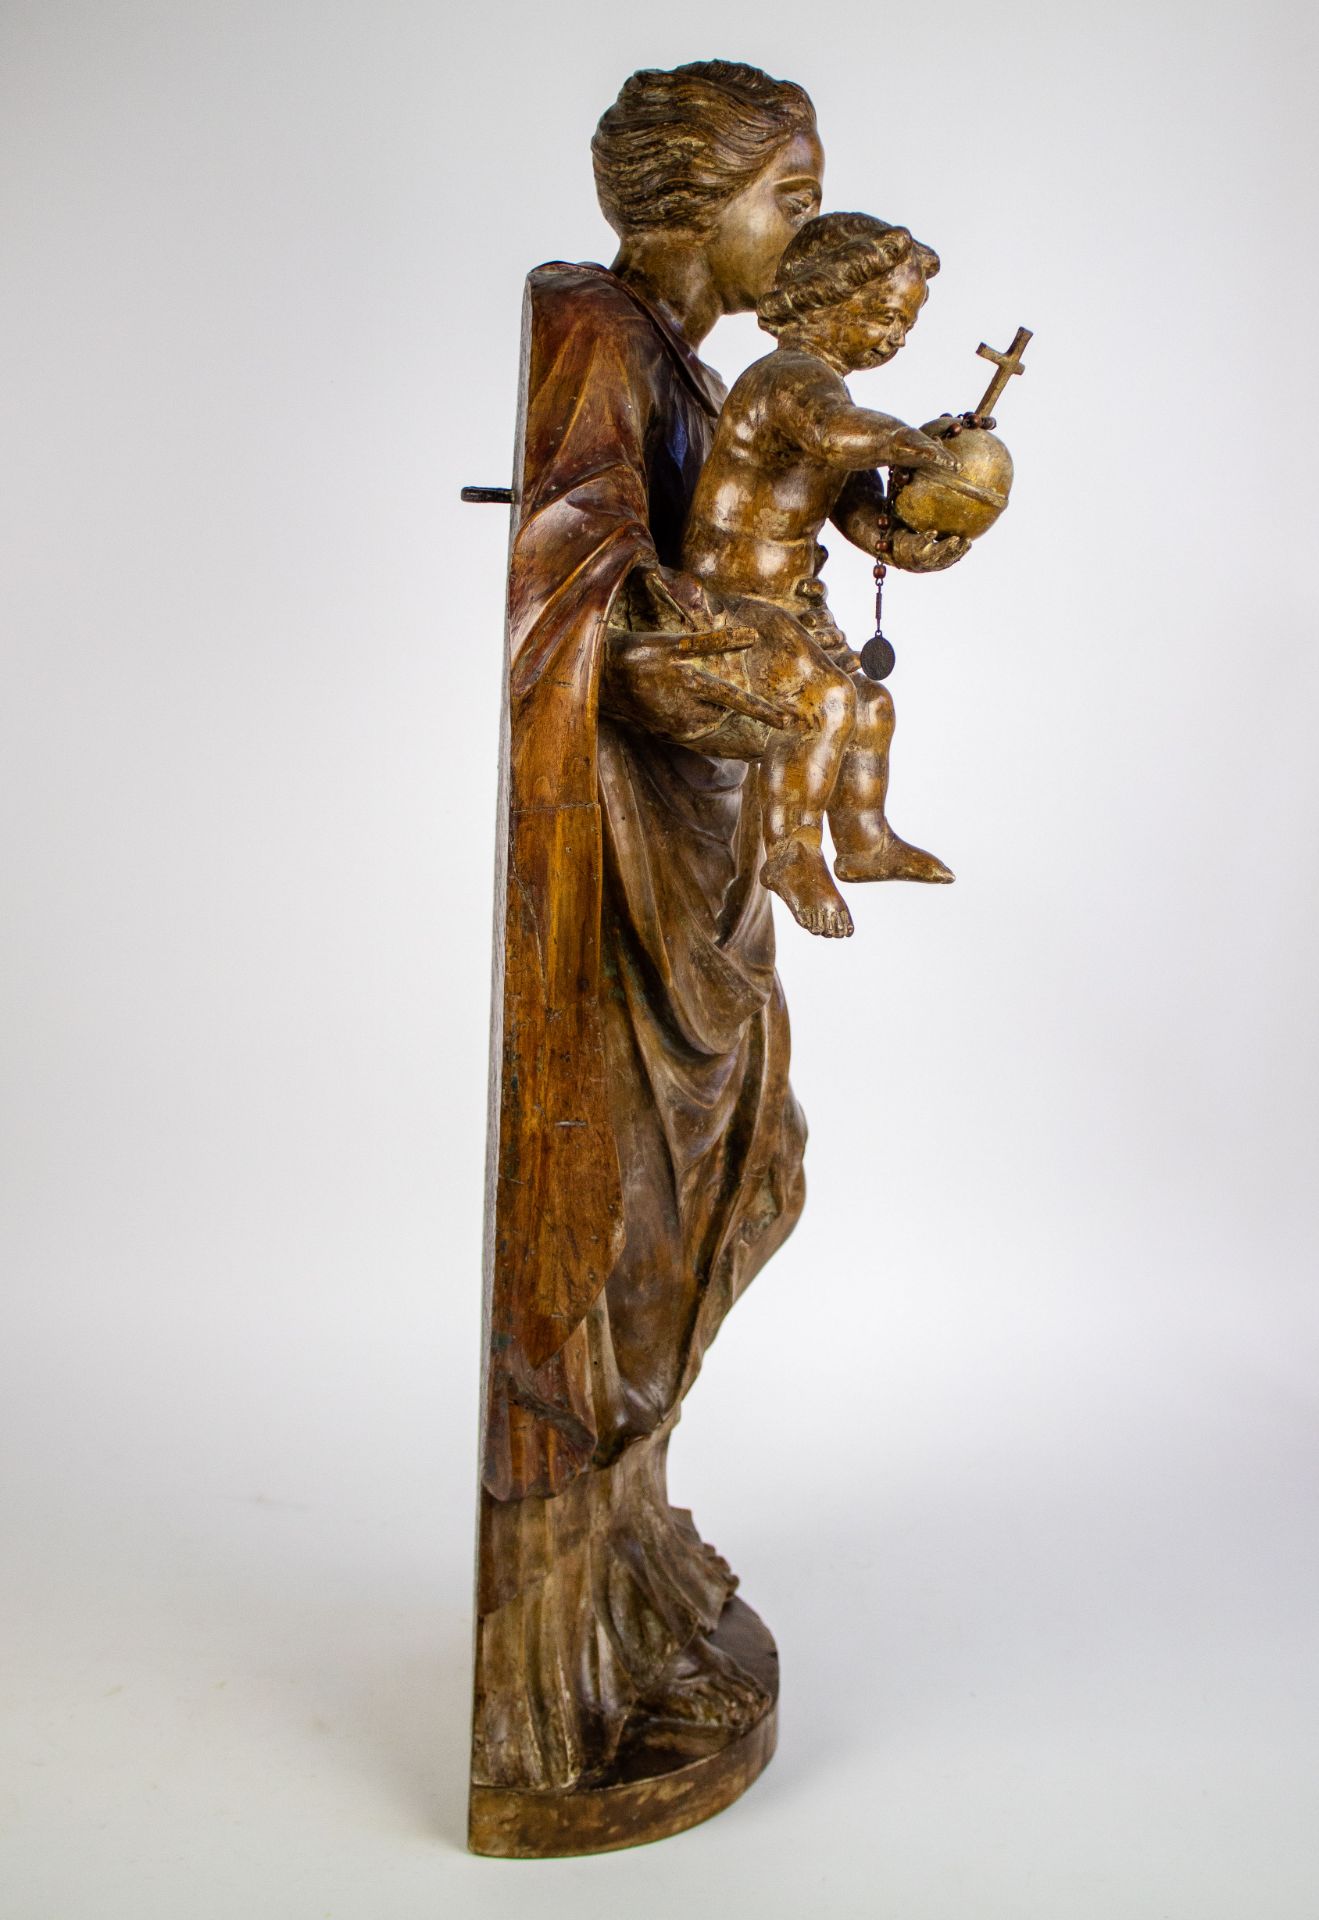 Statue of Virgin Mary carrying Jesus, with globe in his hand - Image 6 of 6